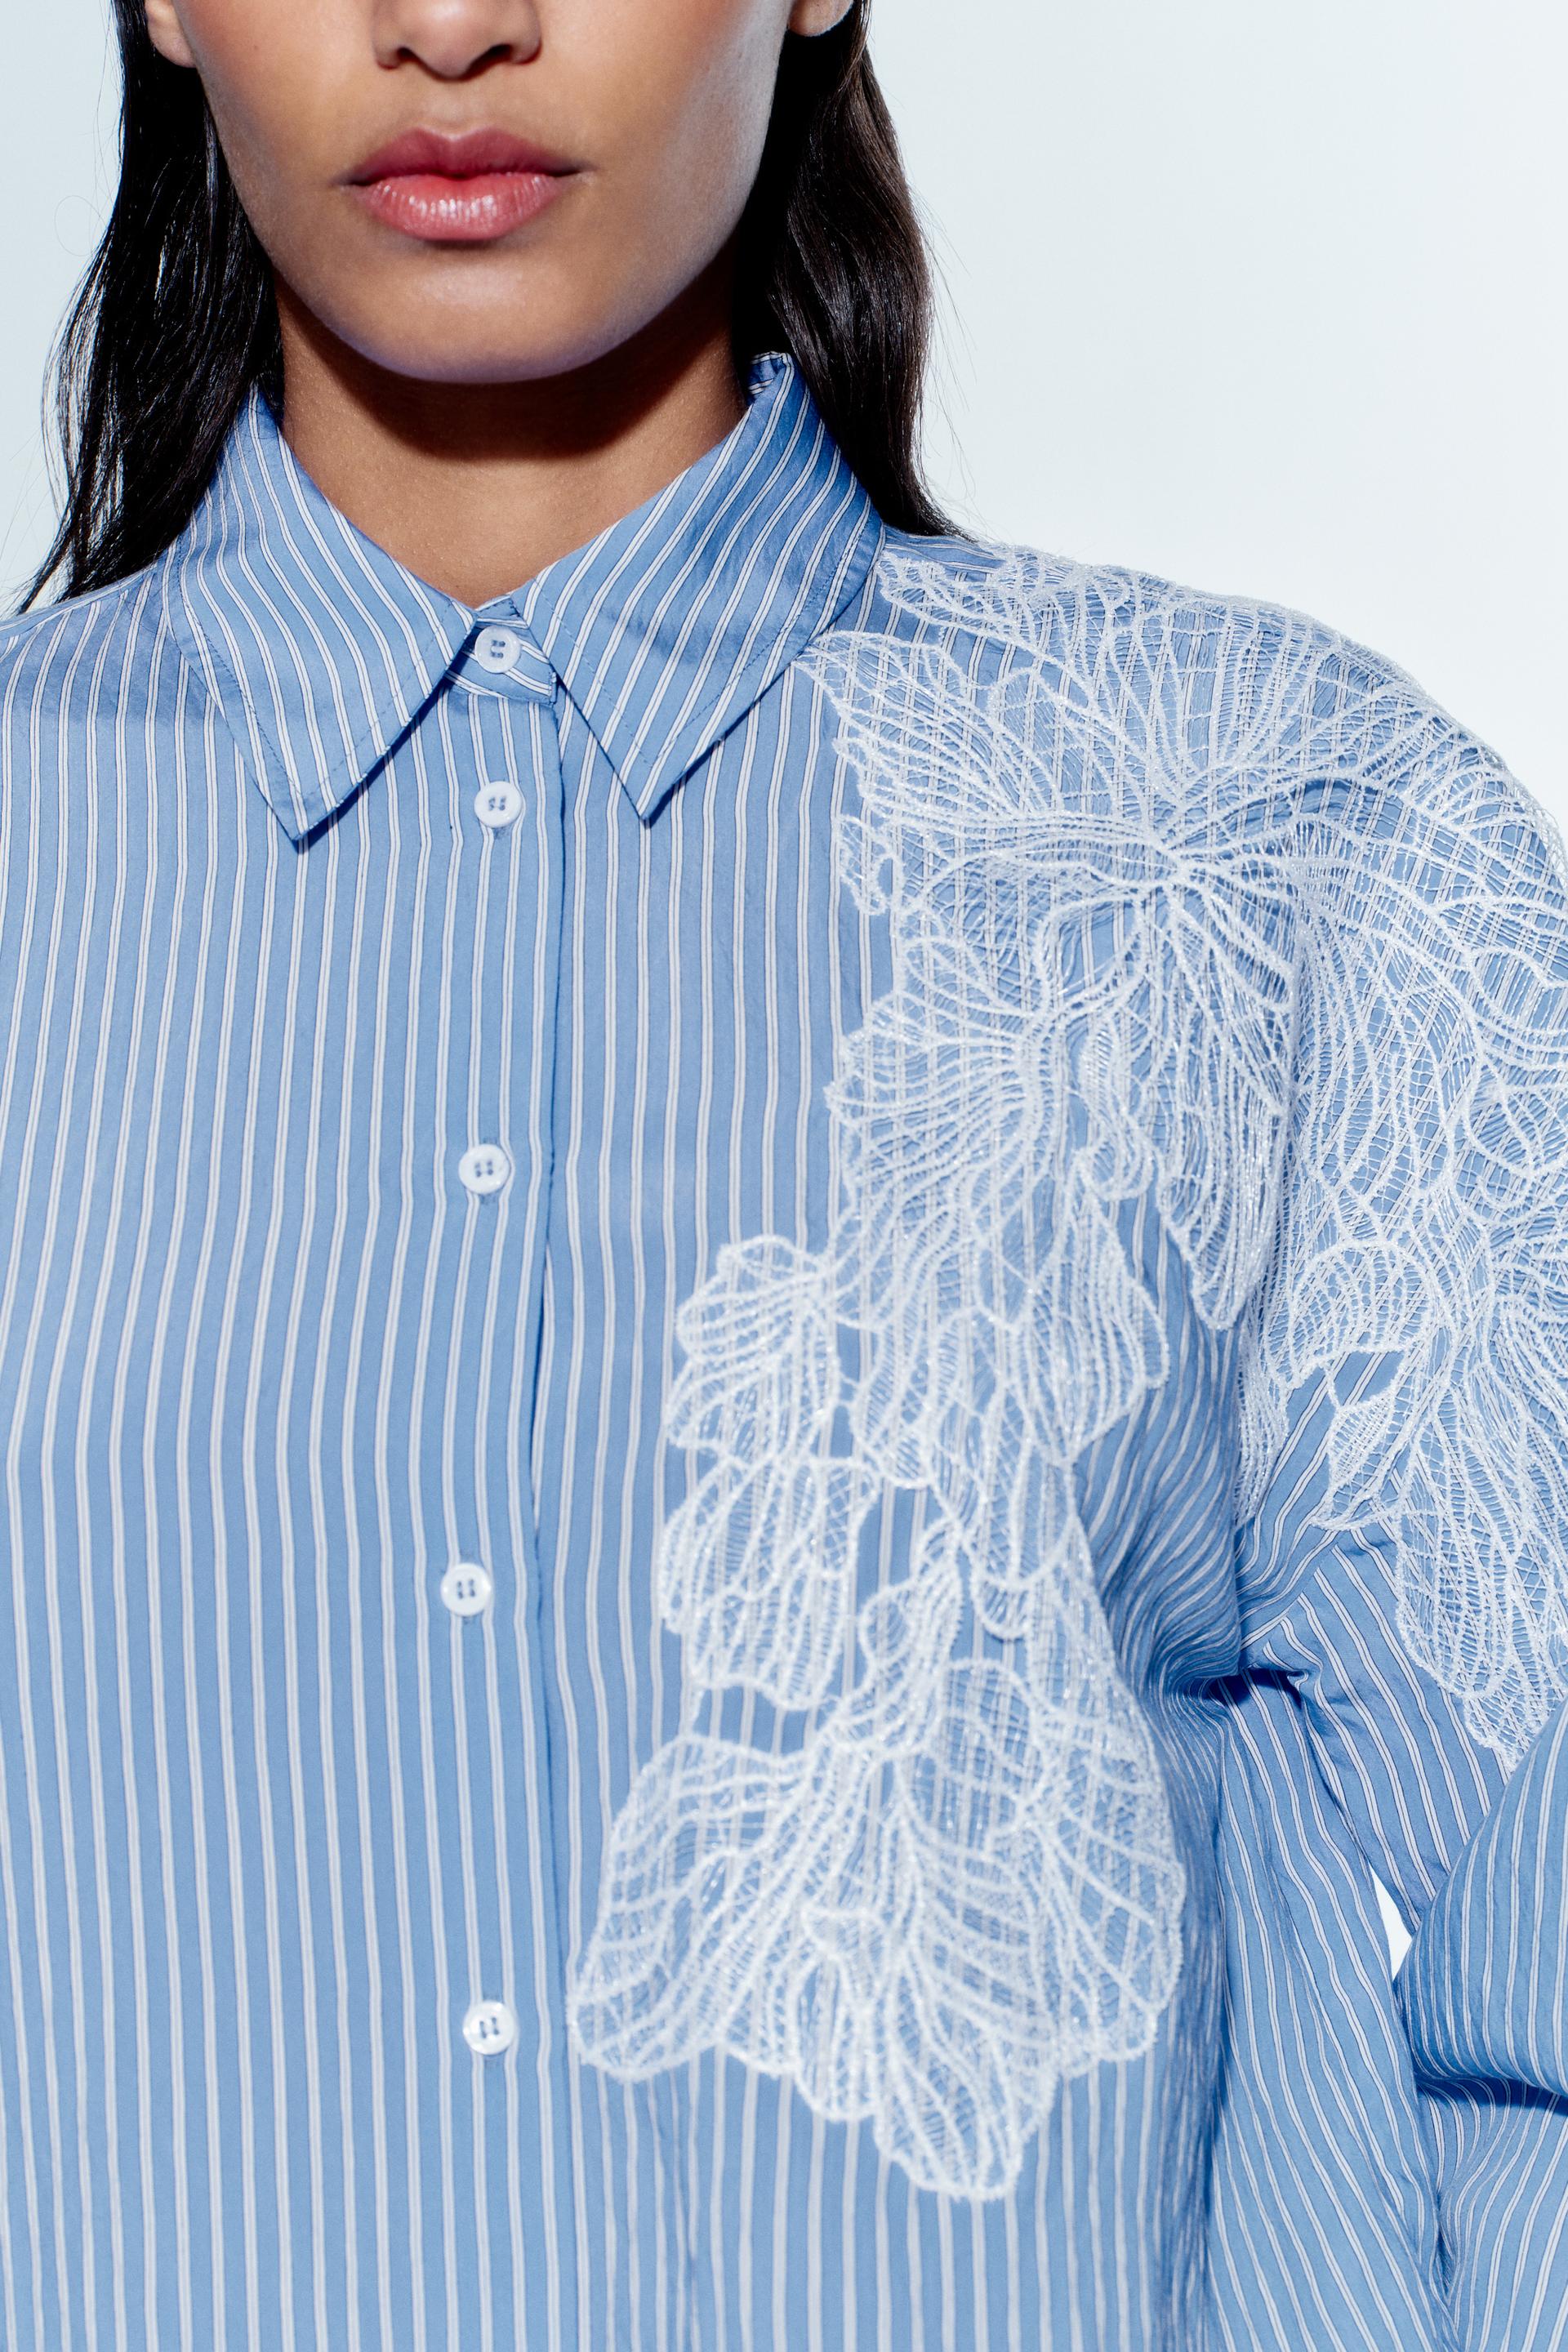 EMBROIDERED FLOWER STRIPED SHIRT - Blue / White